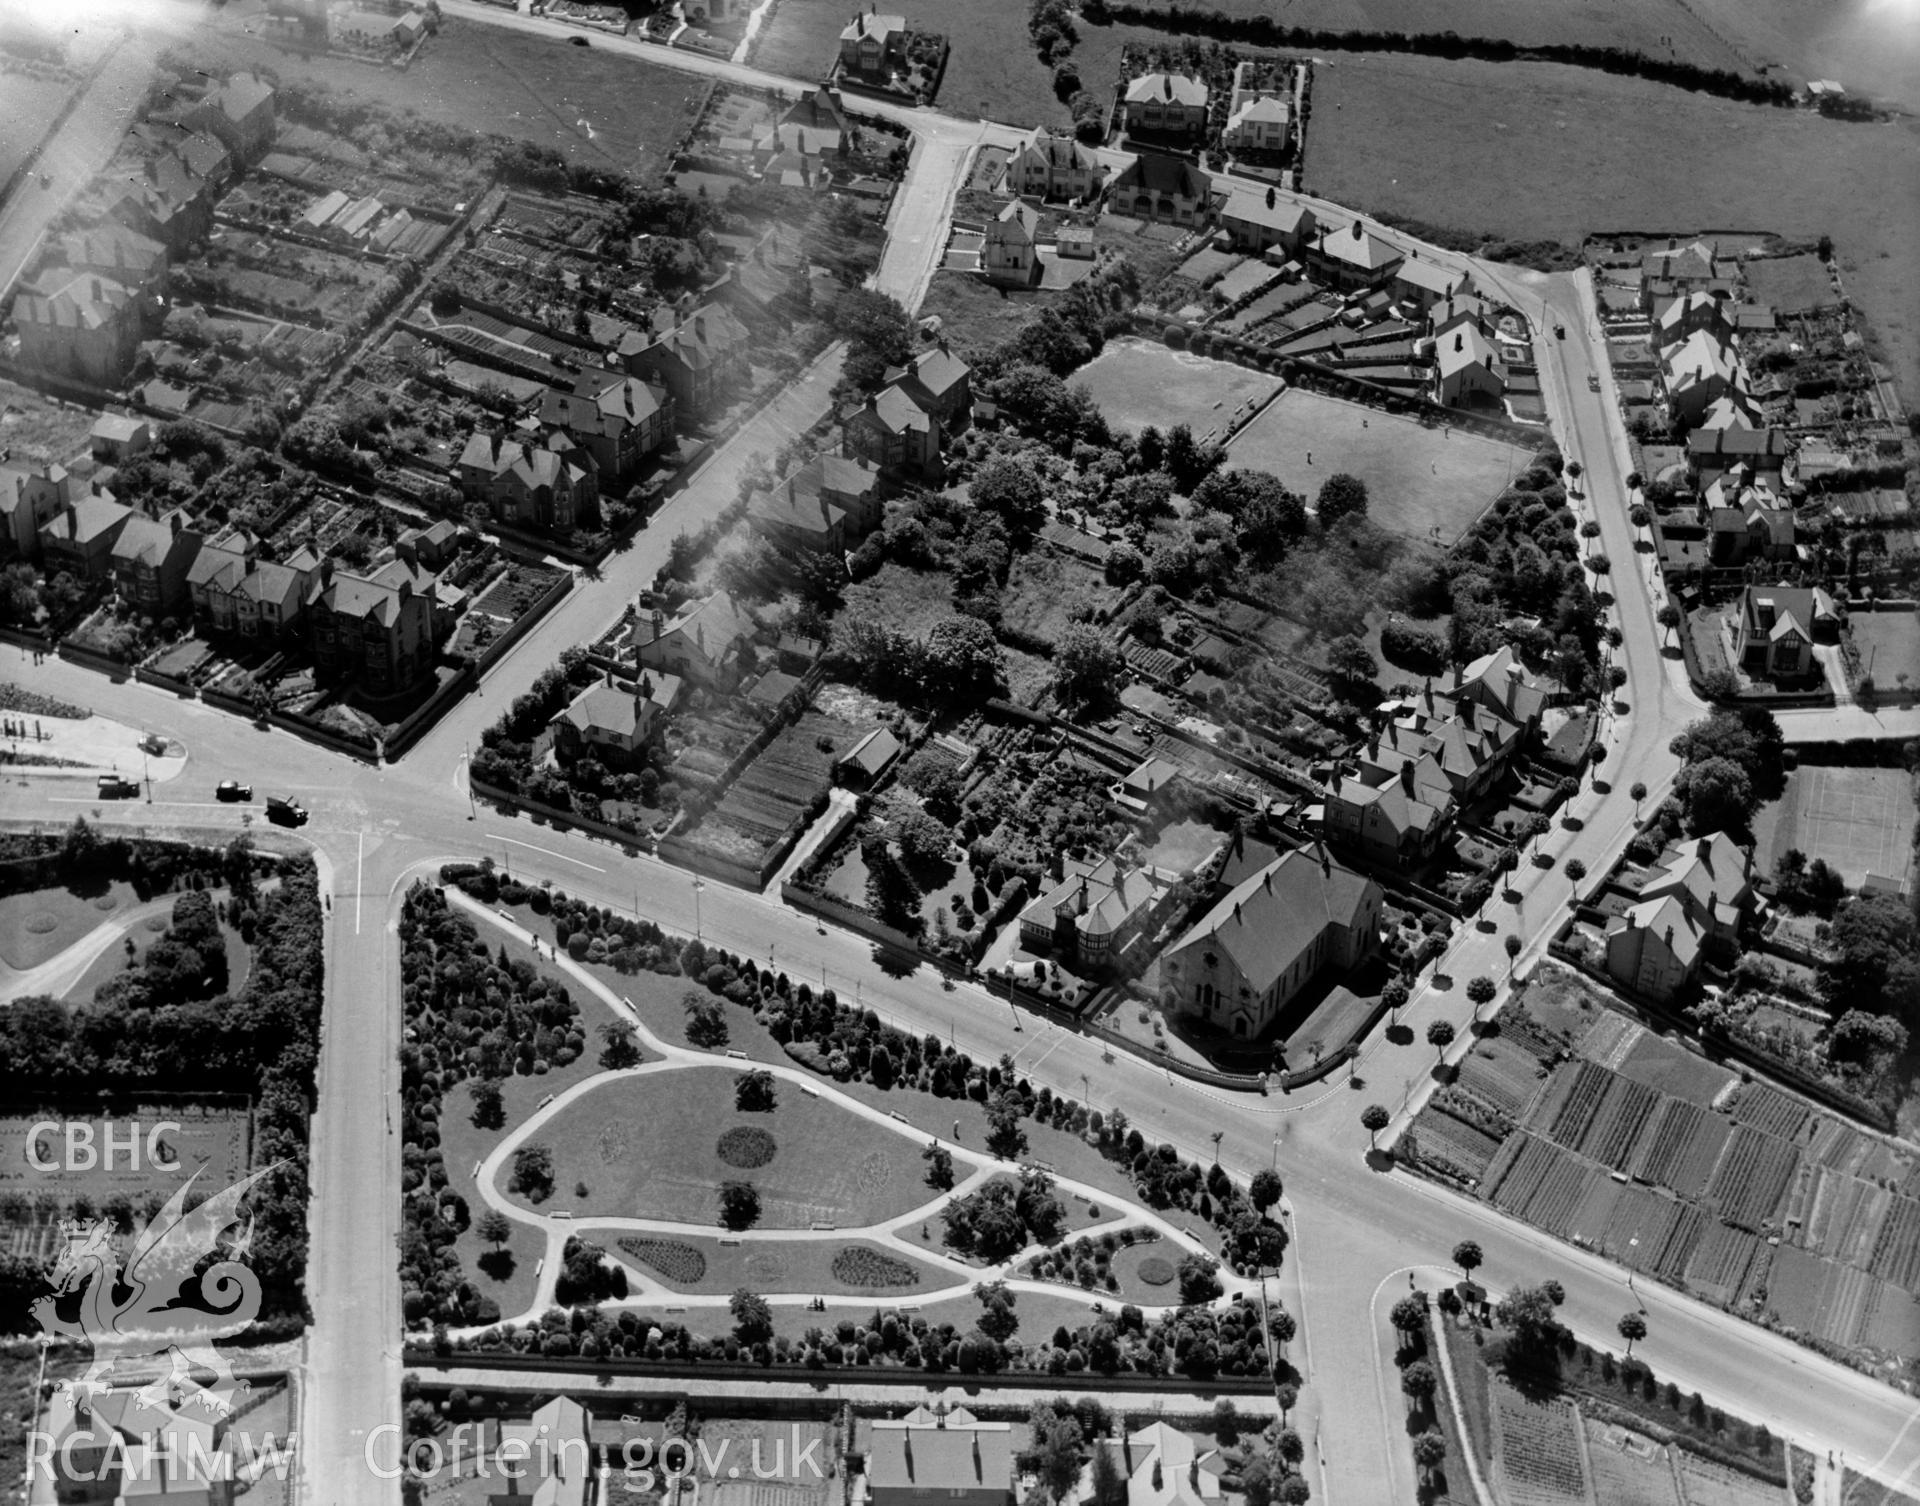 View of part of Old Conwy showing Wynn Gardens, oblique aerial view. 5?x4? black and white glass plate negative.